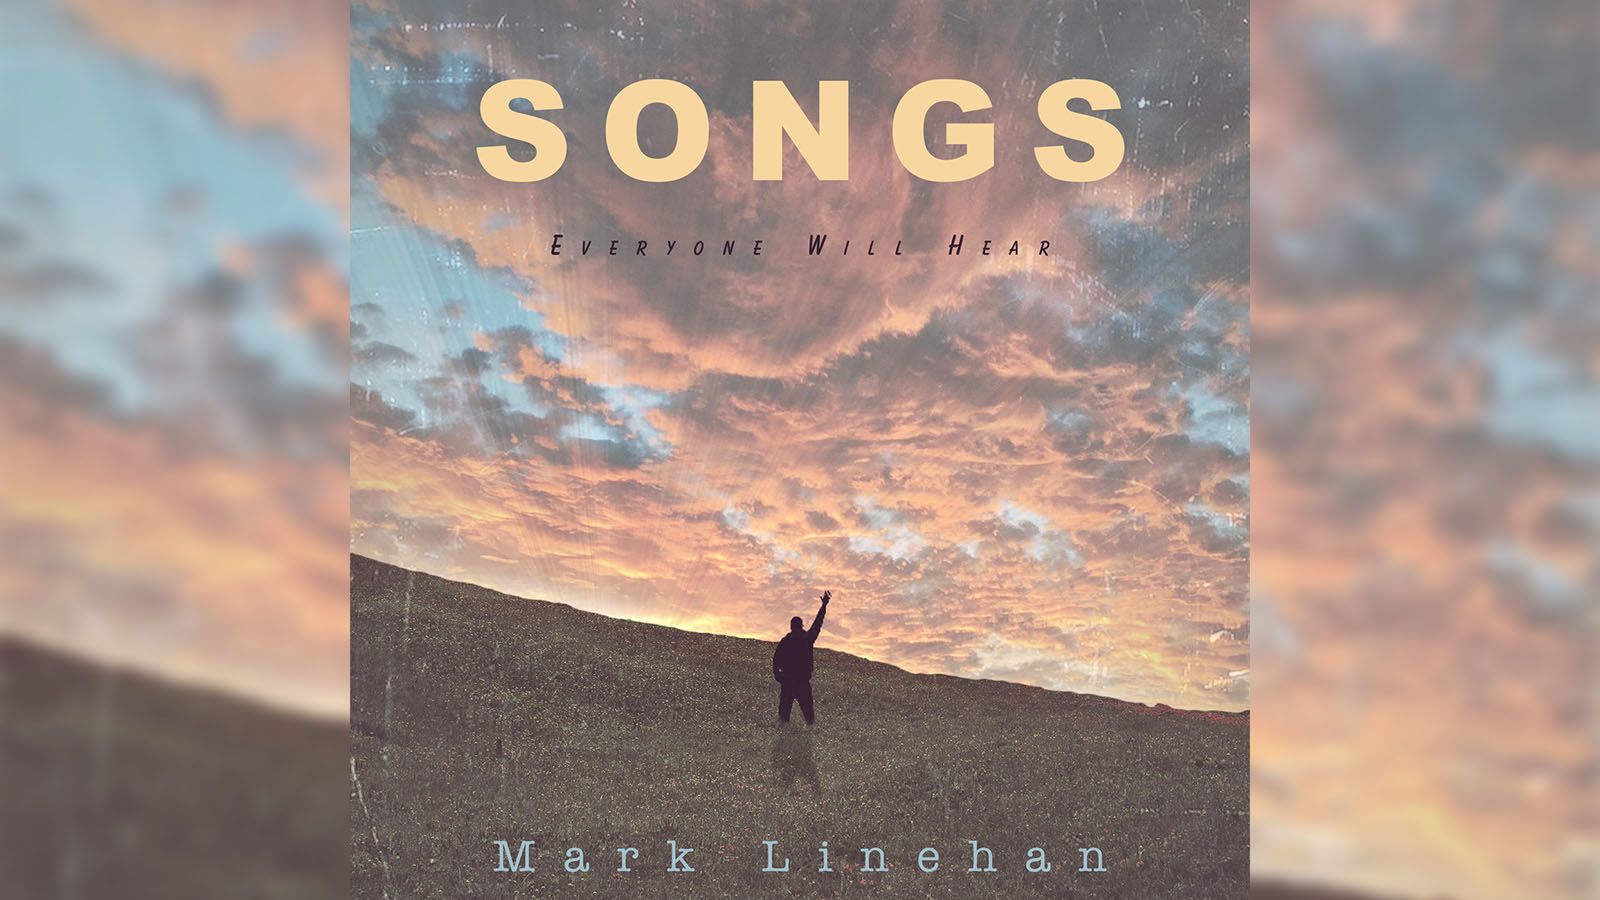 Mark Linehan has produced 12 eclectic songs on his album "Songs Everyone Will Hear."